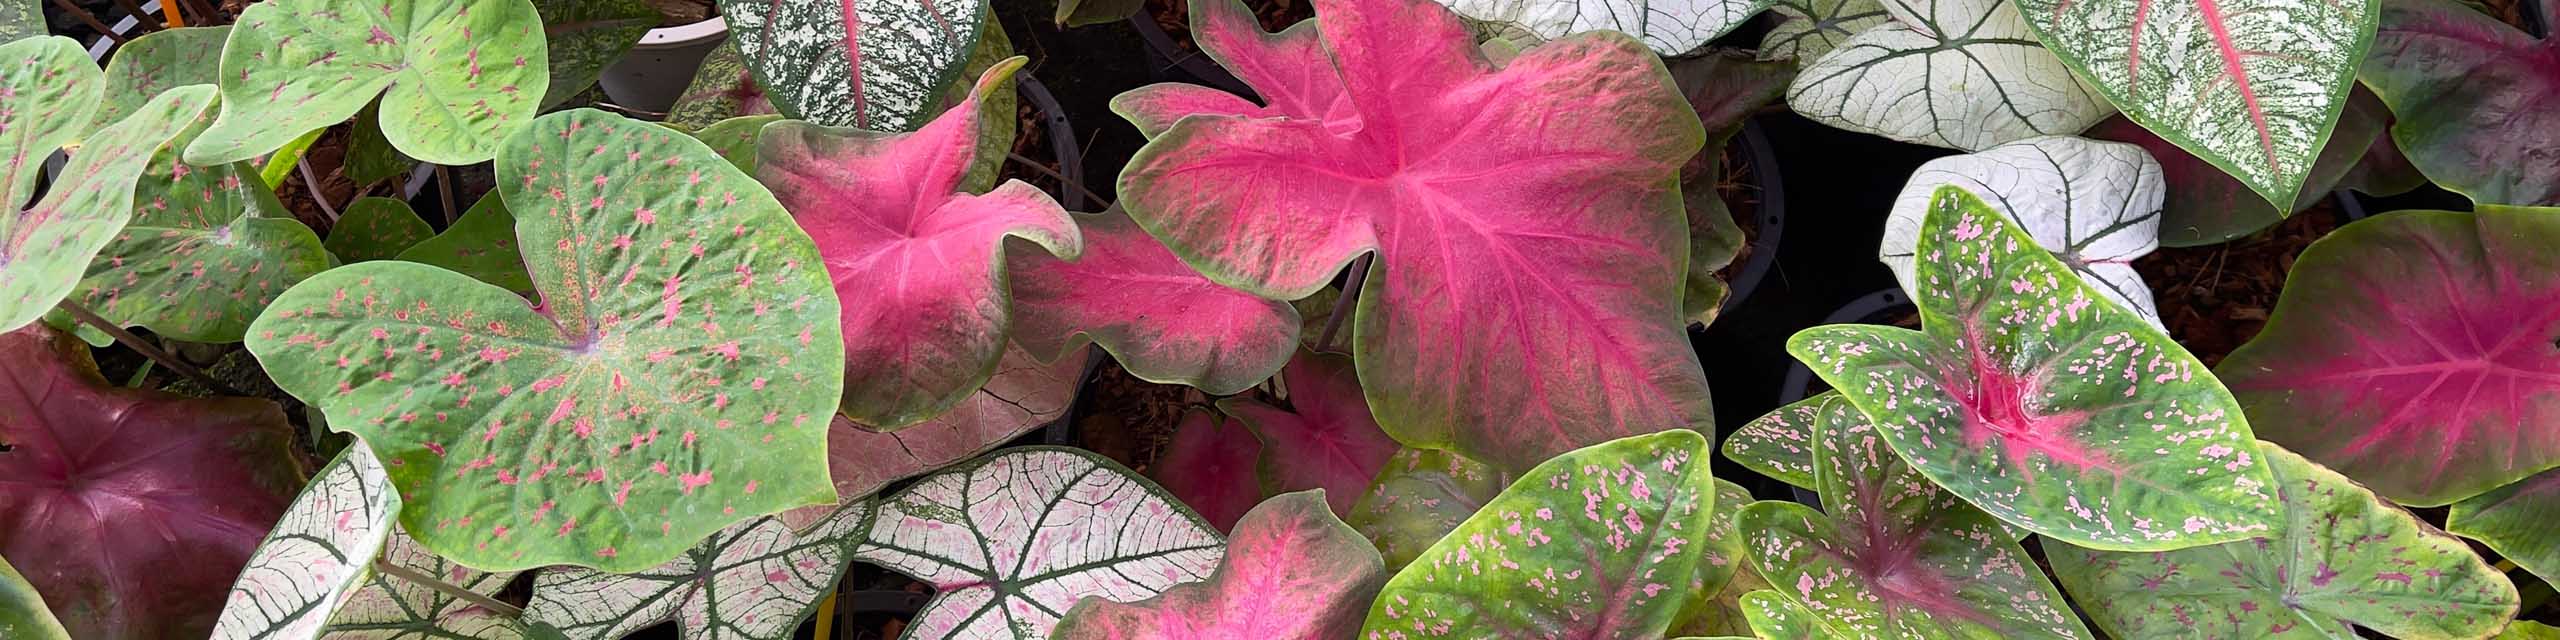 Top down view of colorful caladium plants.